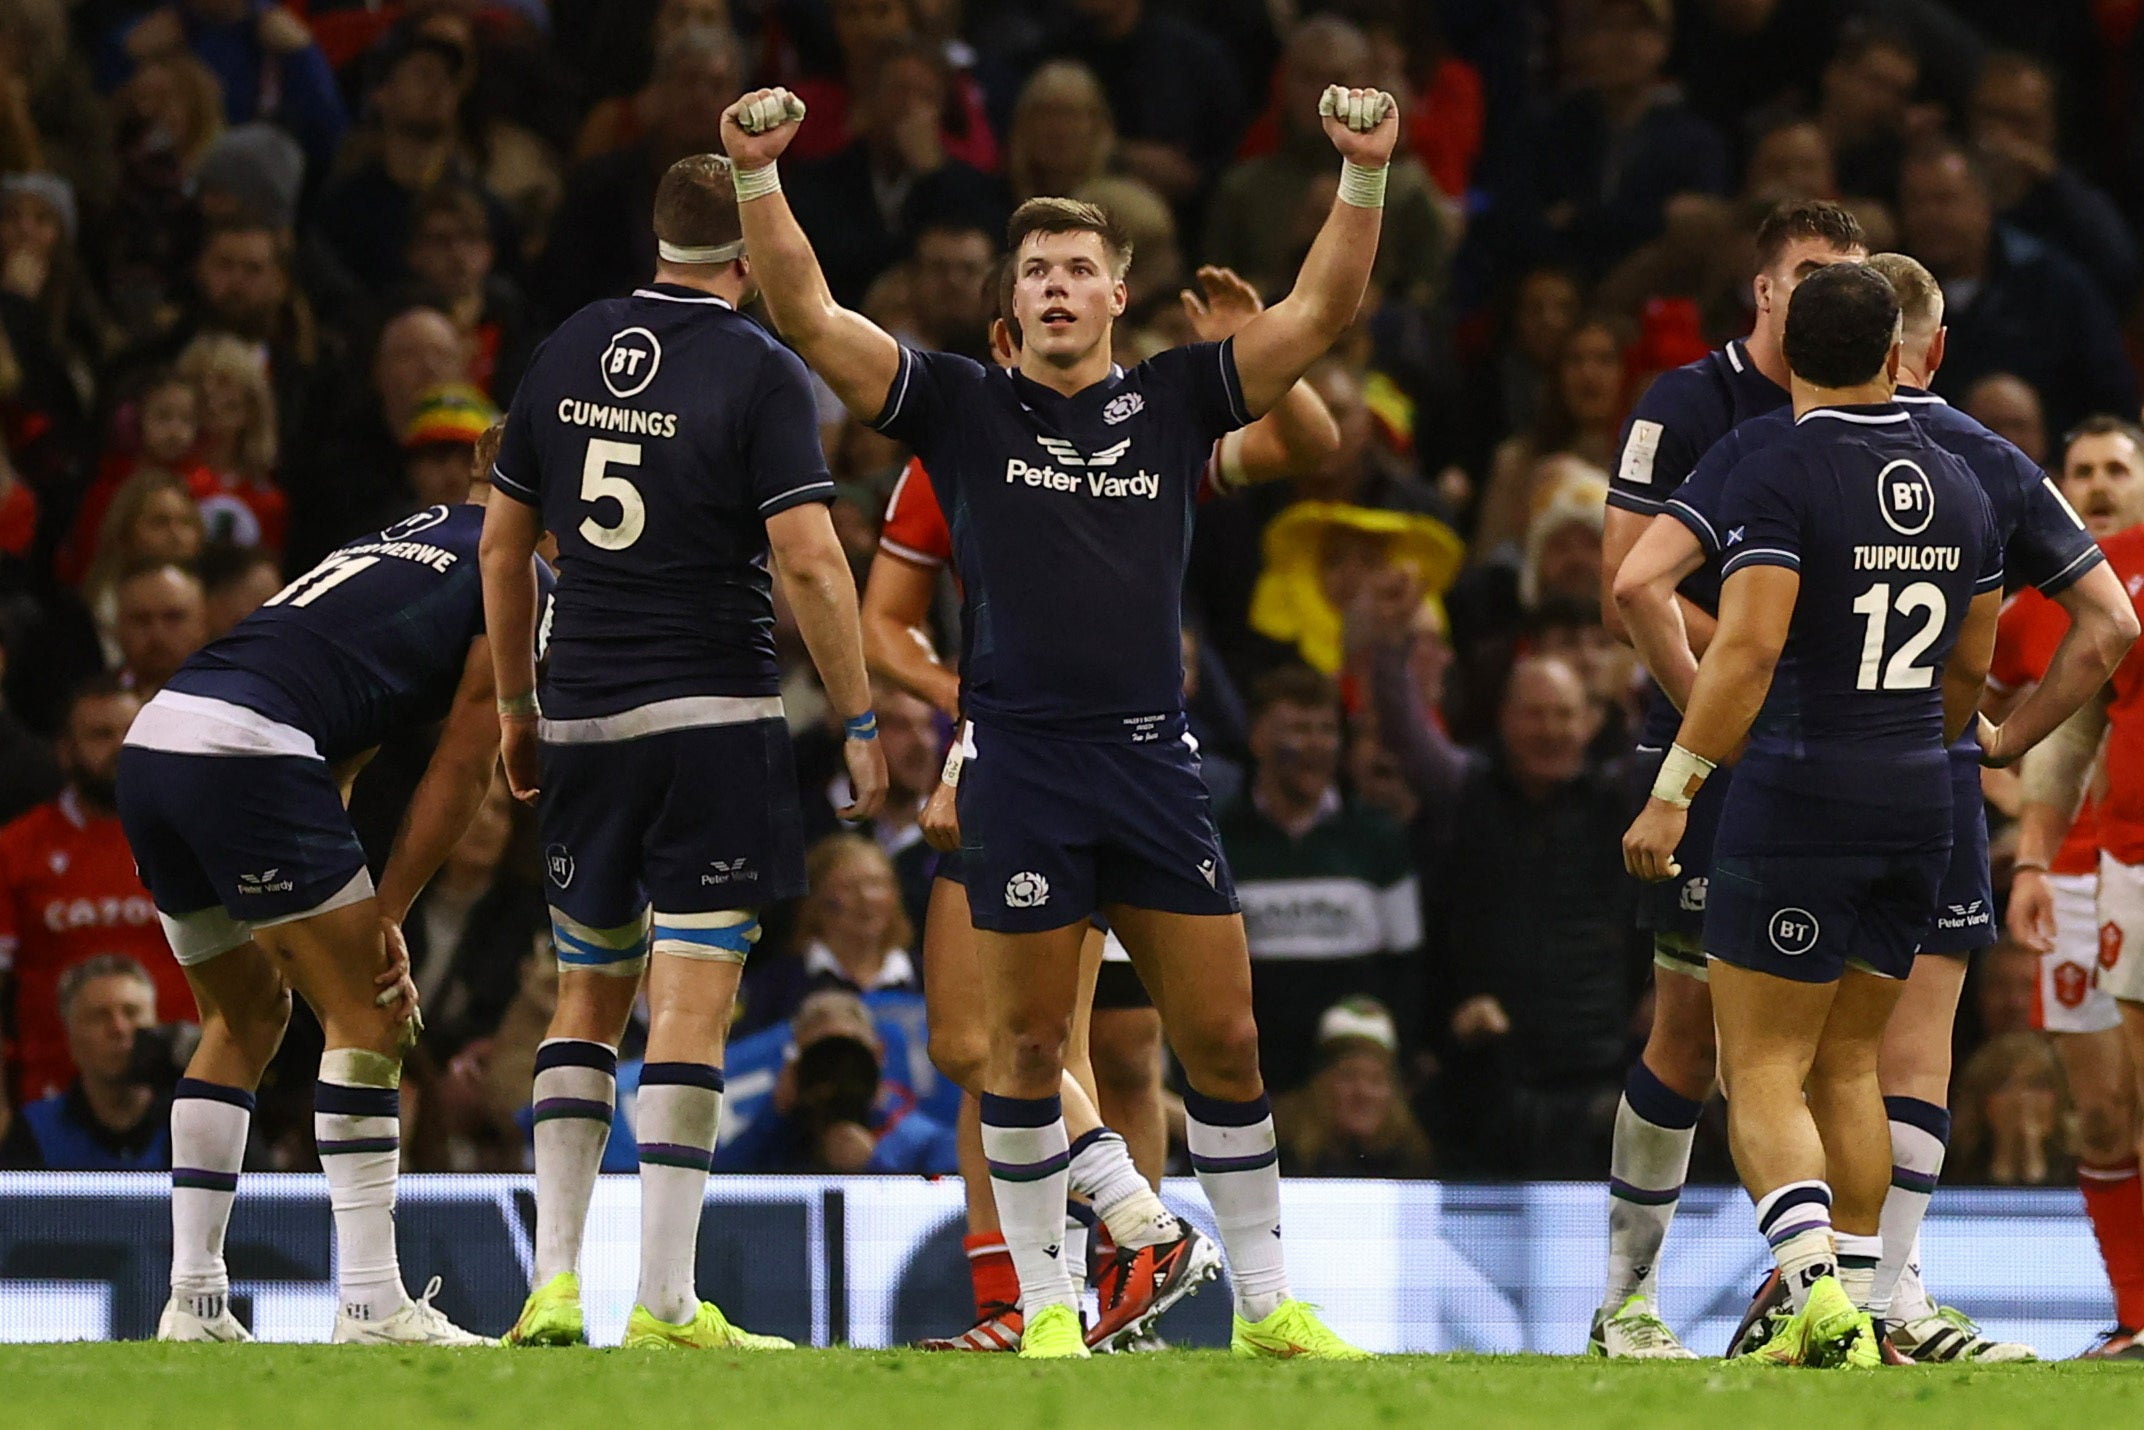 Scotland’s players celebrate a hard-fought win in Cardiff